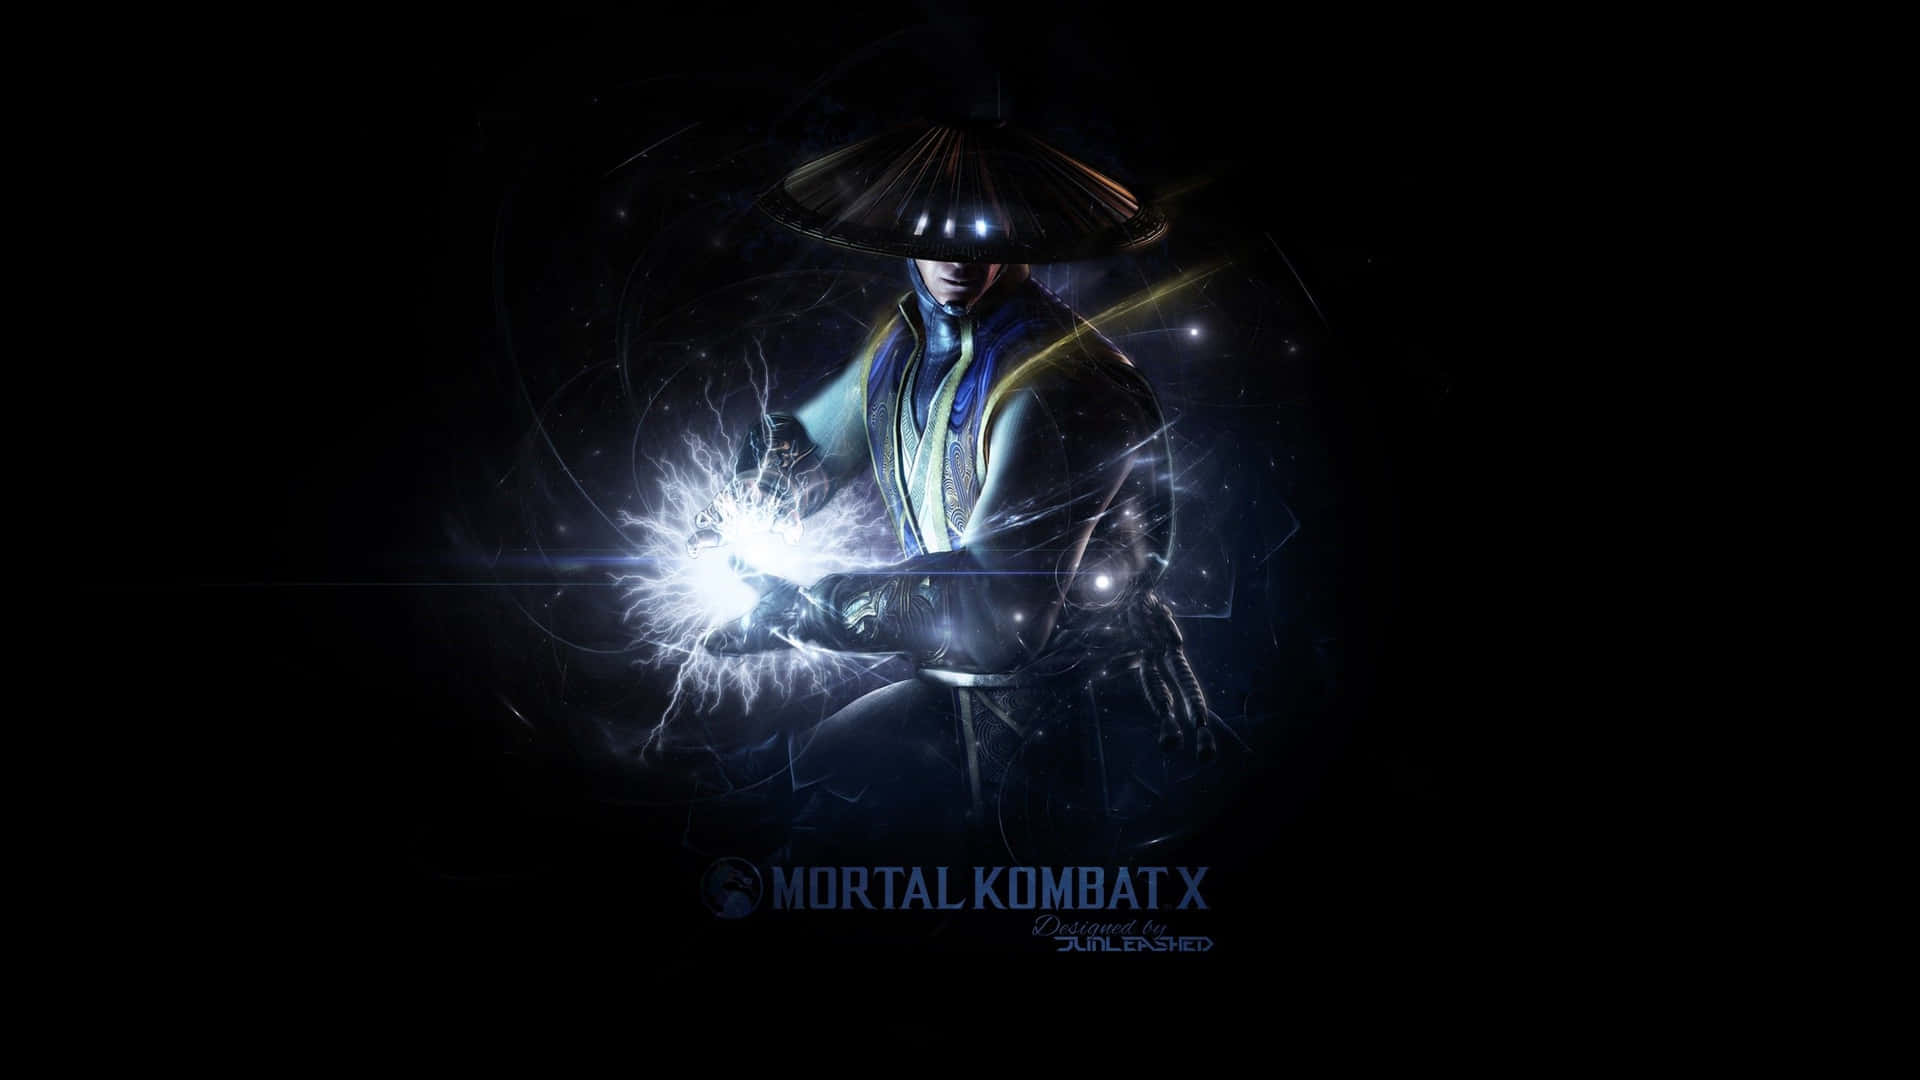 The mighty Raiden unleashes his power in Mortal Kombat Wallpaper